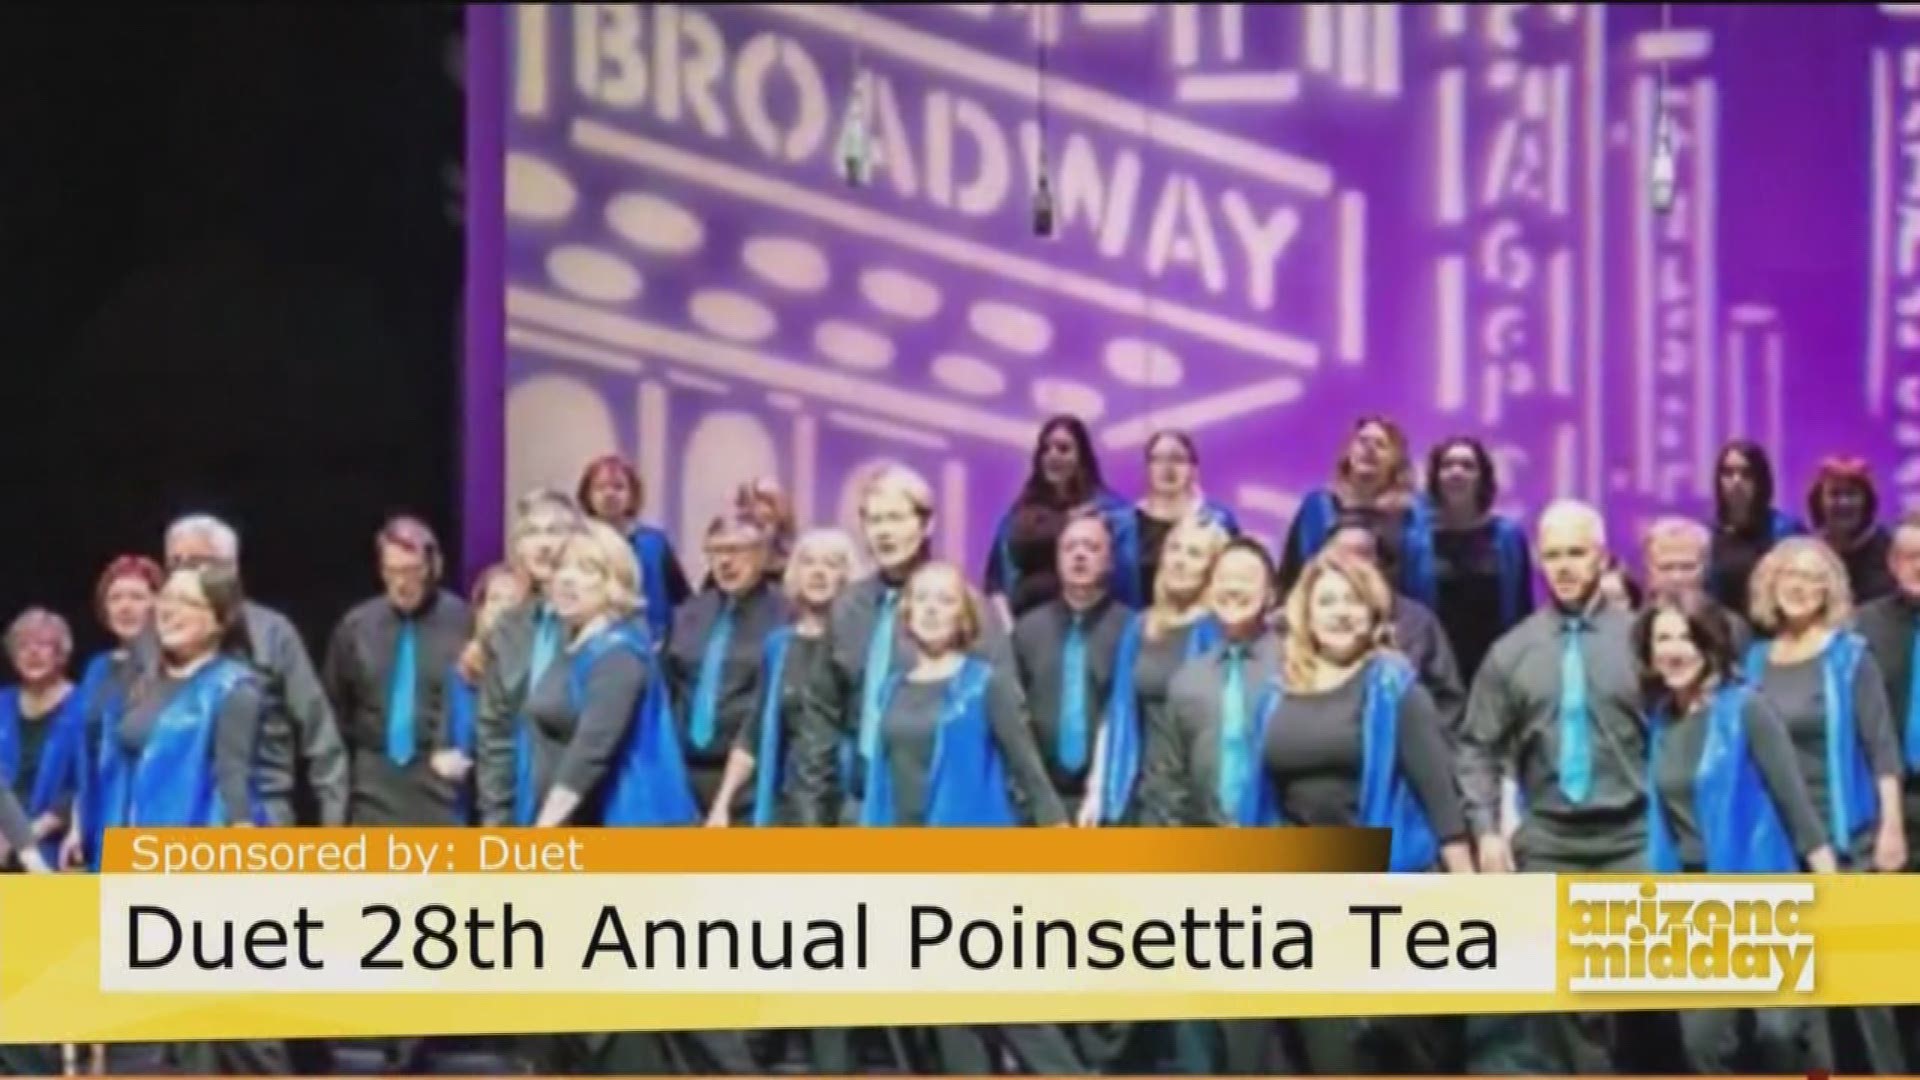 Elizabeth Banta from Duet shares how people can volunteer and give back to the community plus what we can expect from this year's Annual Poinsettia Tea.